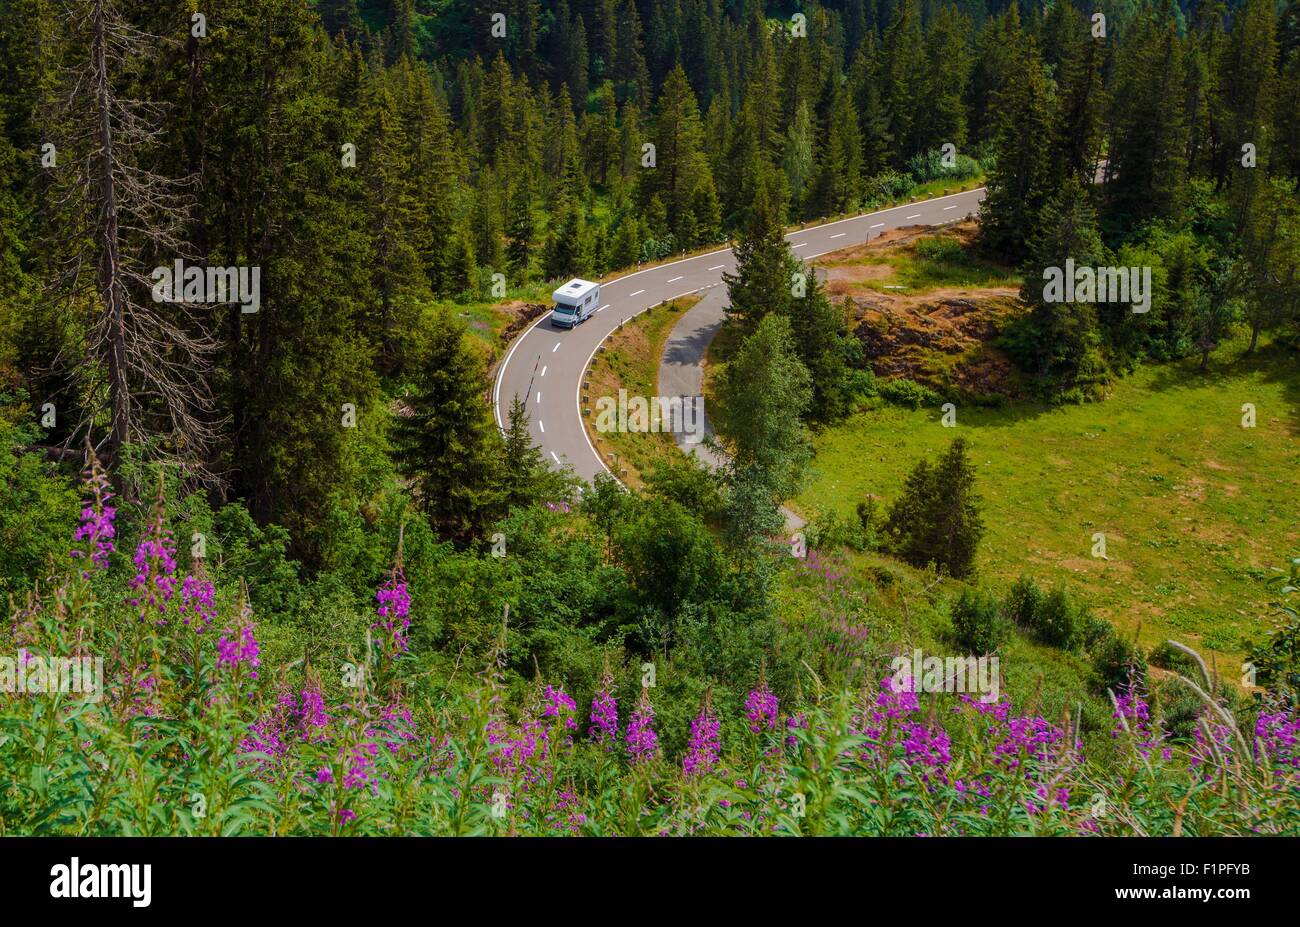 Camper Van Summer Travel. Rving Photo Theme. Small Class C Travel Camper on a Mountain Road During Summer Time. Stock Photo